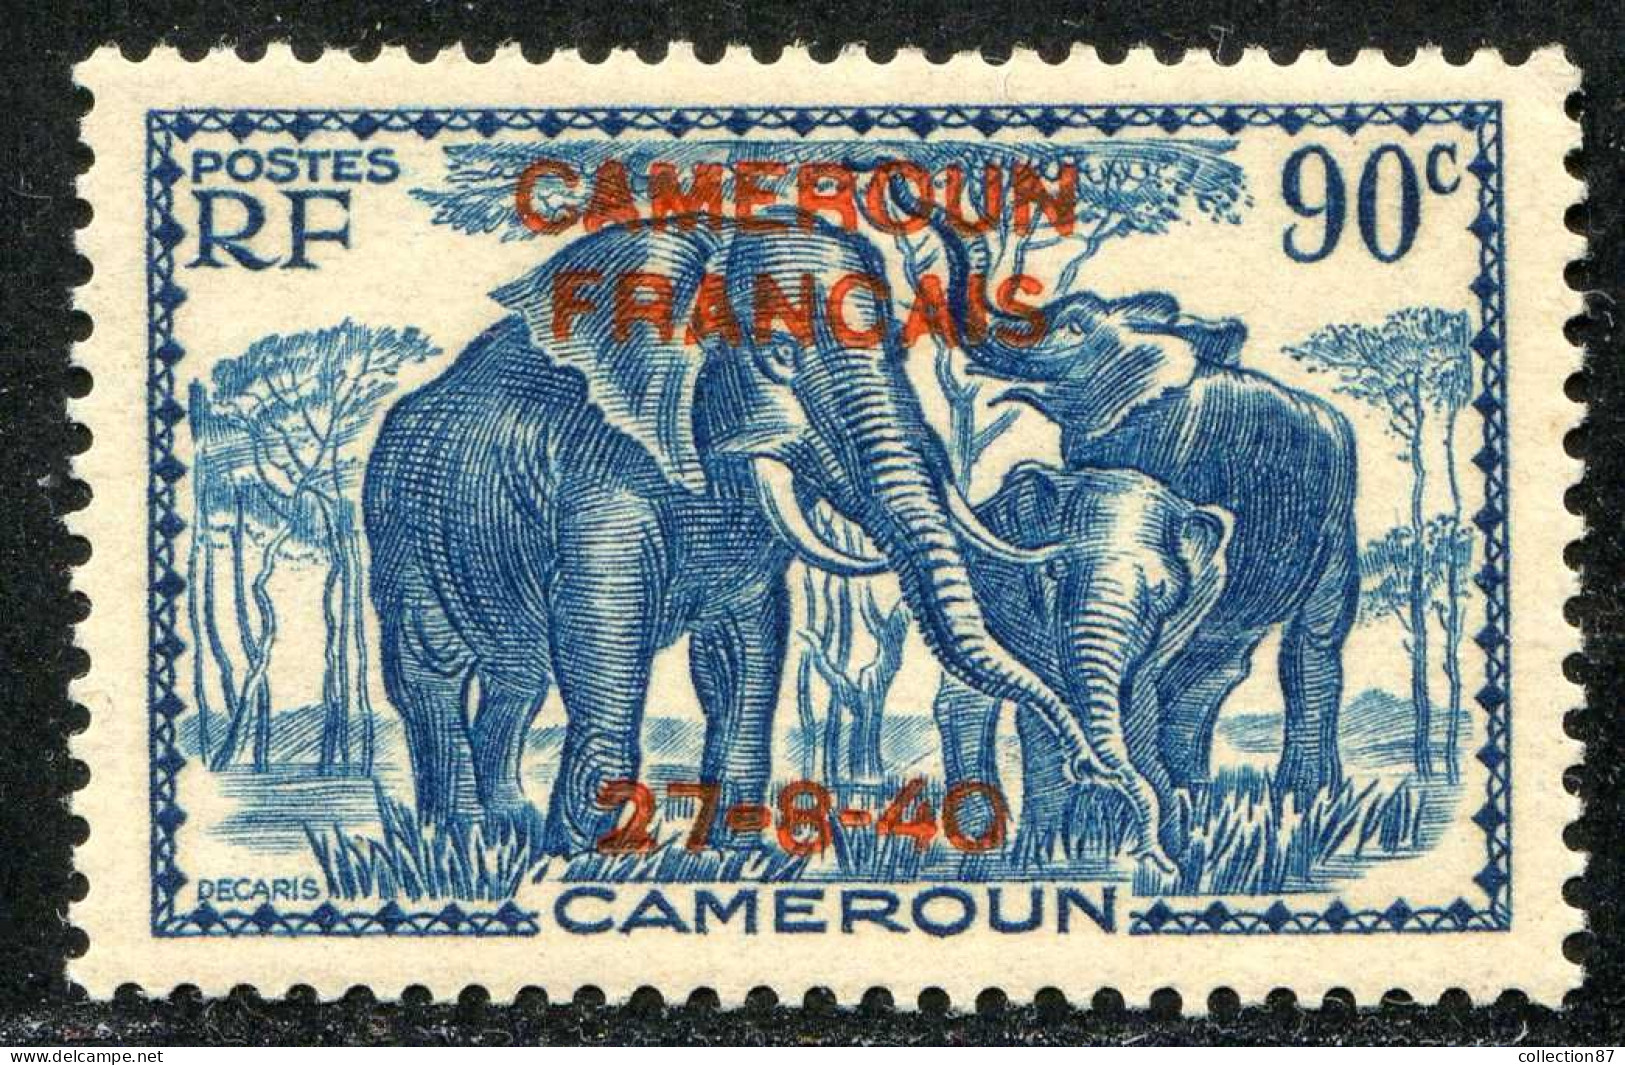 REF090 > CAMEROUN < Yv N° 222 * * Neuf Luxe Dos Visible -- MNH * * -- ELEPHANT - Unused Stamps